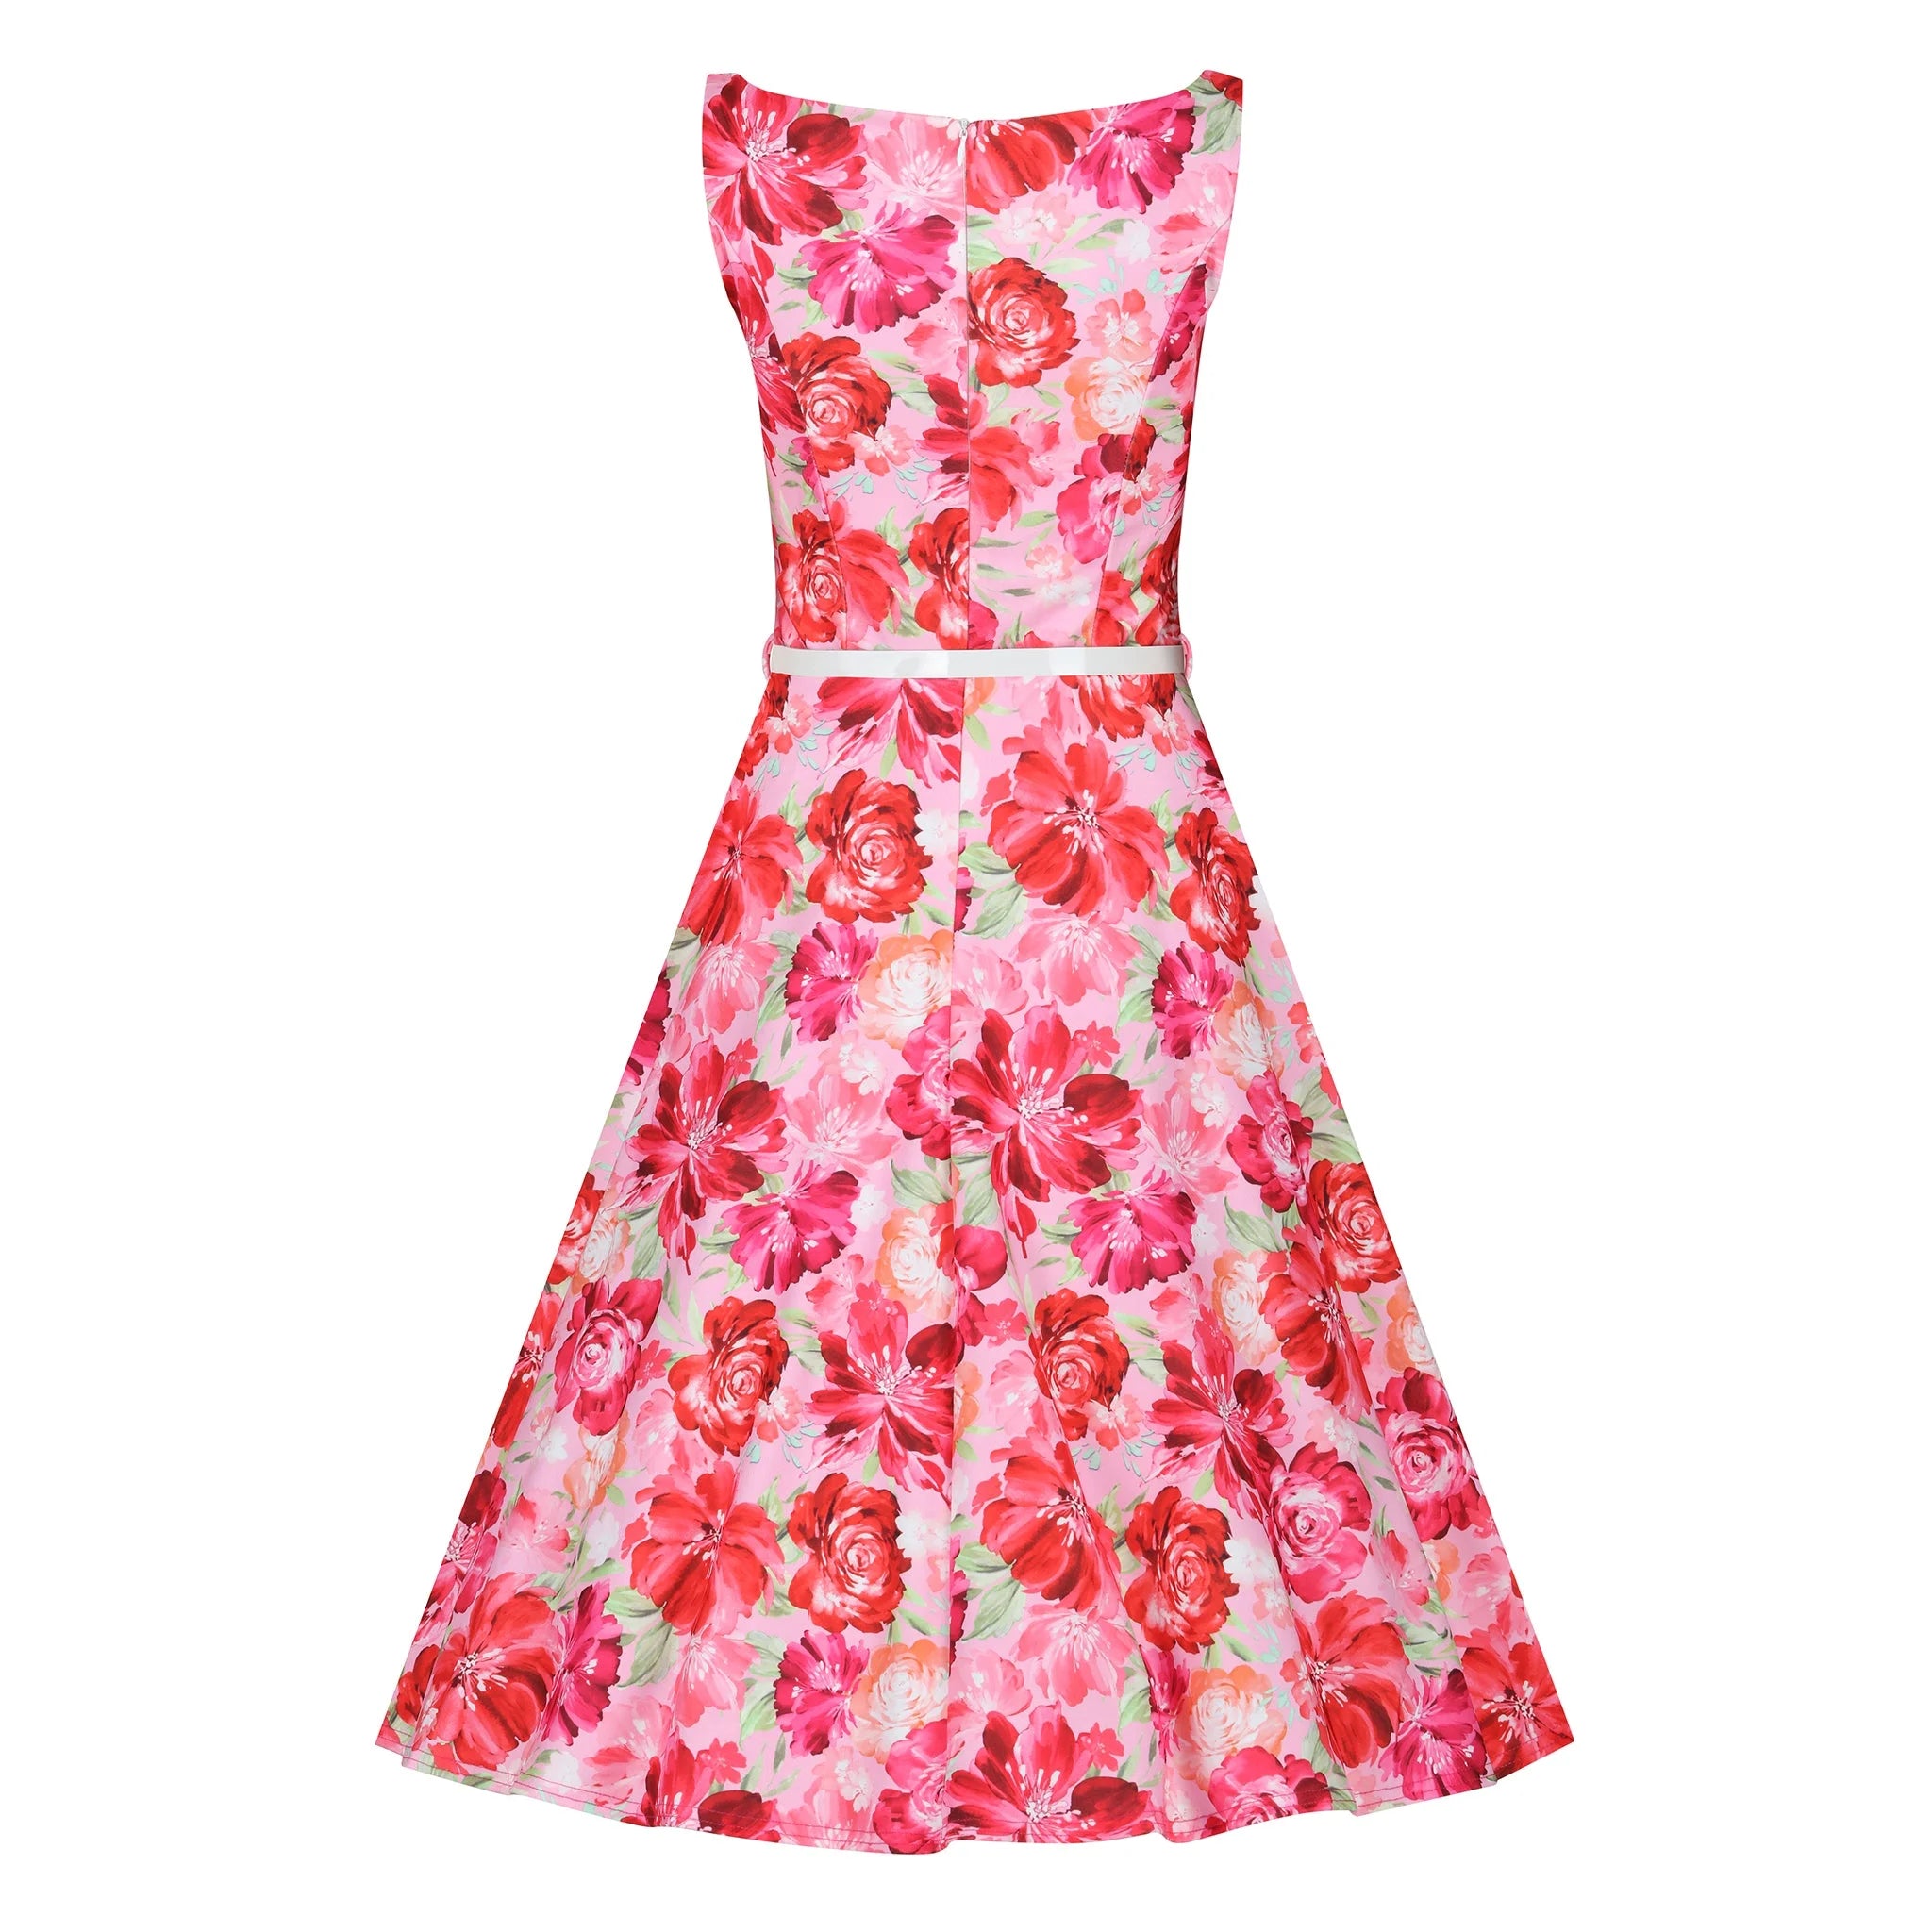 Pink & Red Floral Audrey Hepburn Style Sleeveless 50s Swing Dress With Boat Neckline